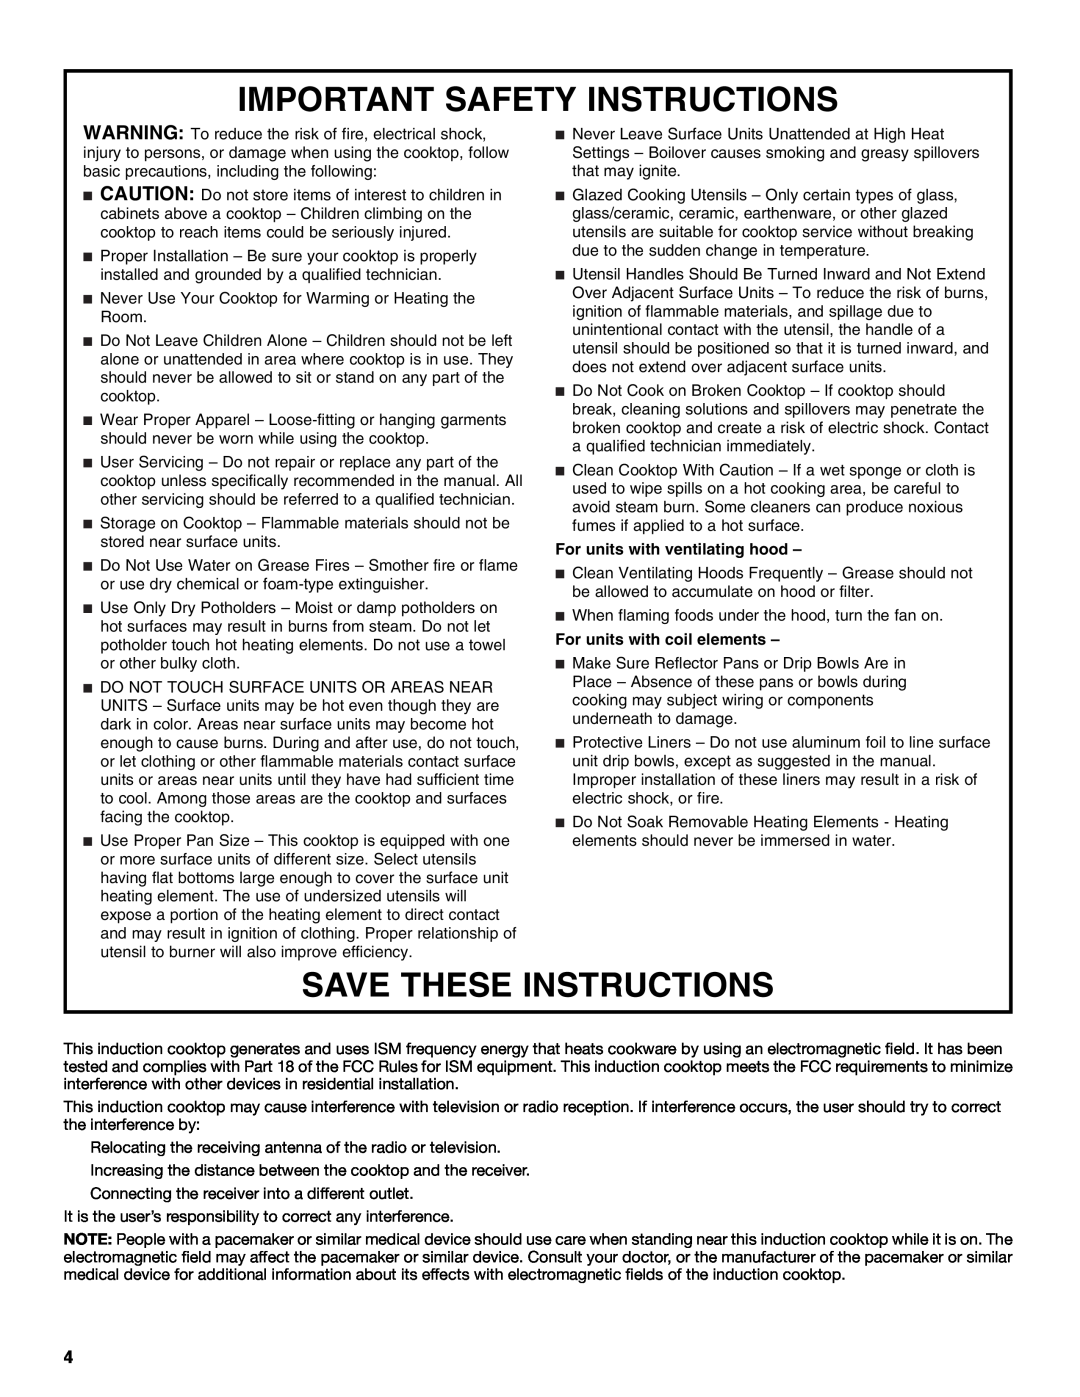 Jenn-Air W10141605 manual Important Safety Instructions, Save These Instructions, For units with ventilating hood 